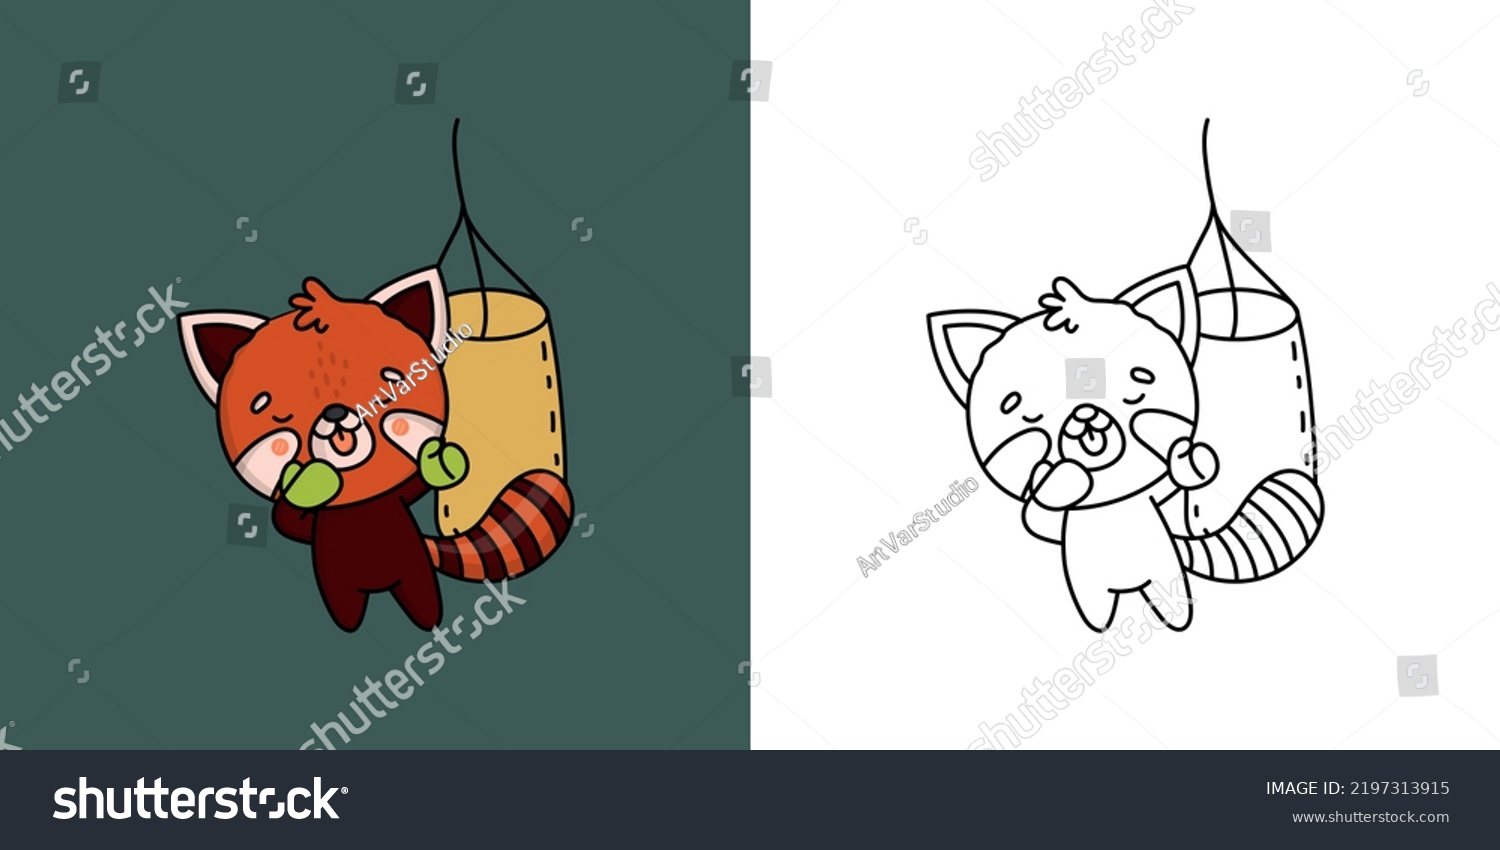 SVG of Cute Red Panda Sportsman Clipart Illustration and Black and White. Funny Animal Athlete. Vector Illustration of a Kawaii Animal for Coloring Pages, Stickers, Baby Shower, Prints for Clothes.
 svg